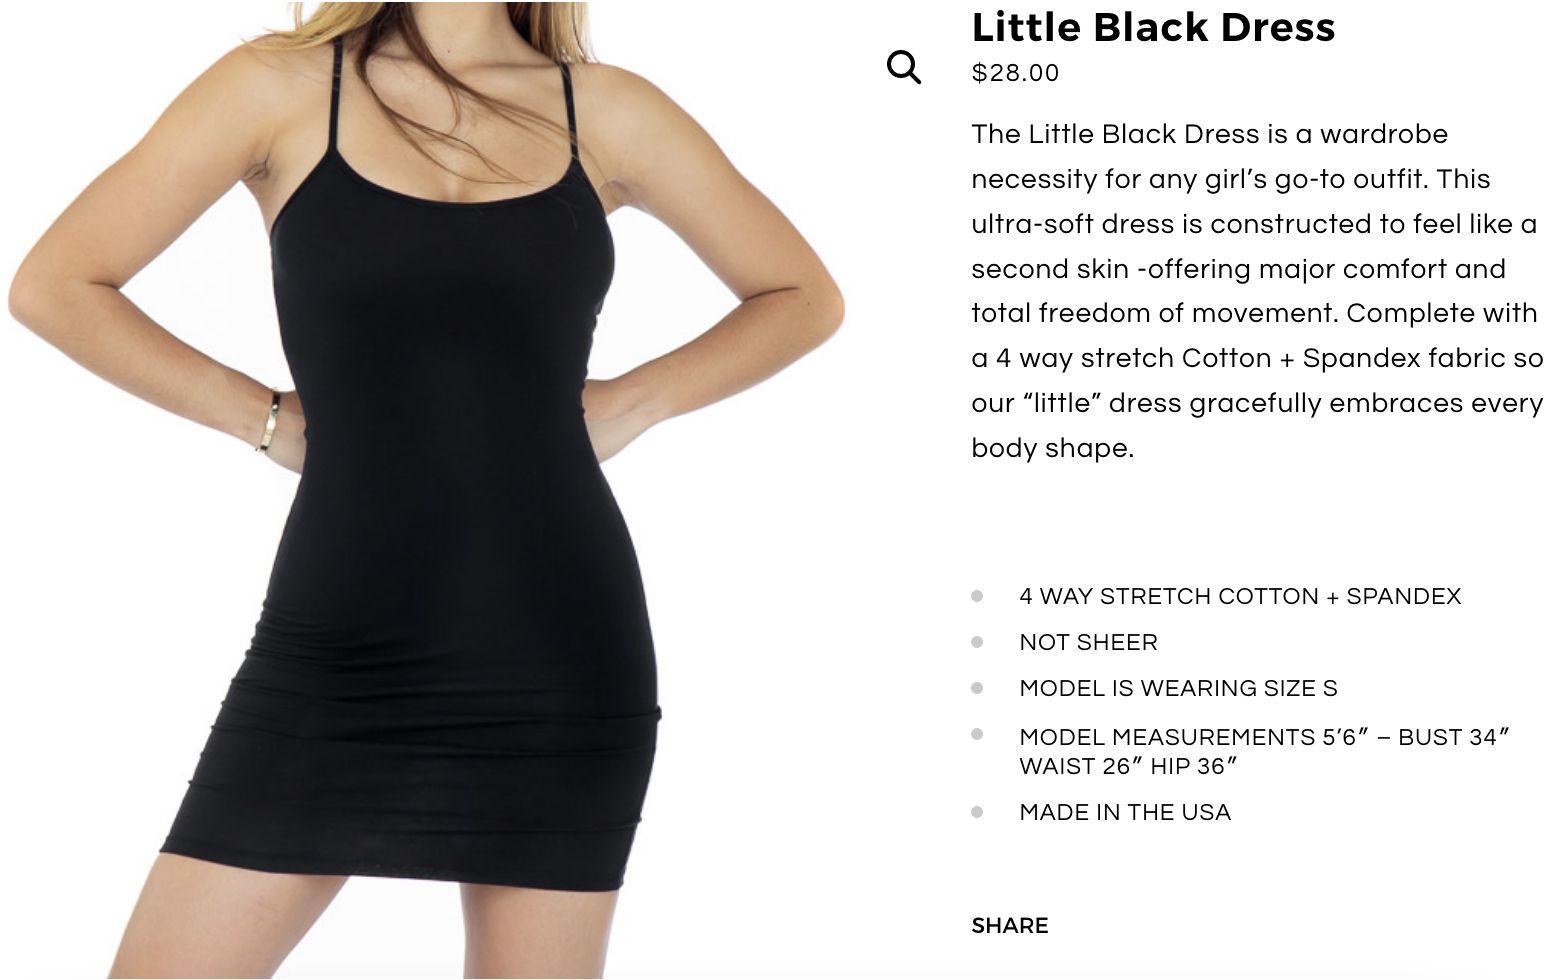 Black dress product photo and example description featuring text that targets a specific audience.